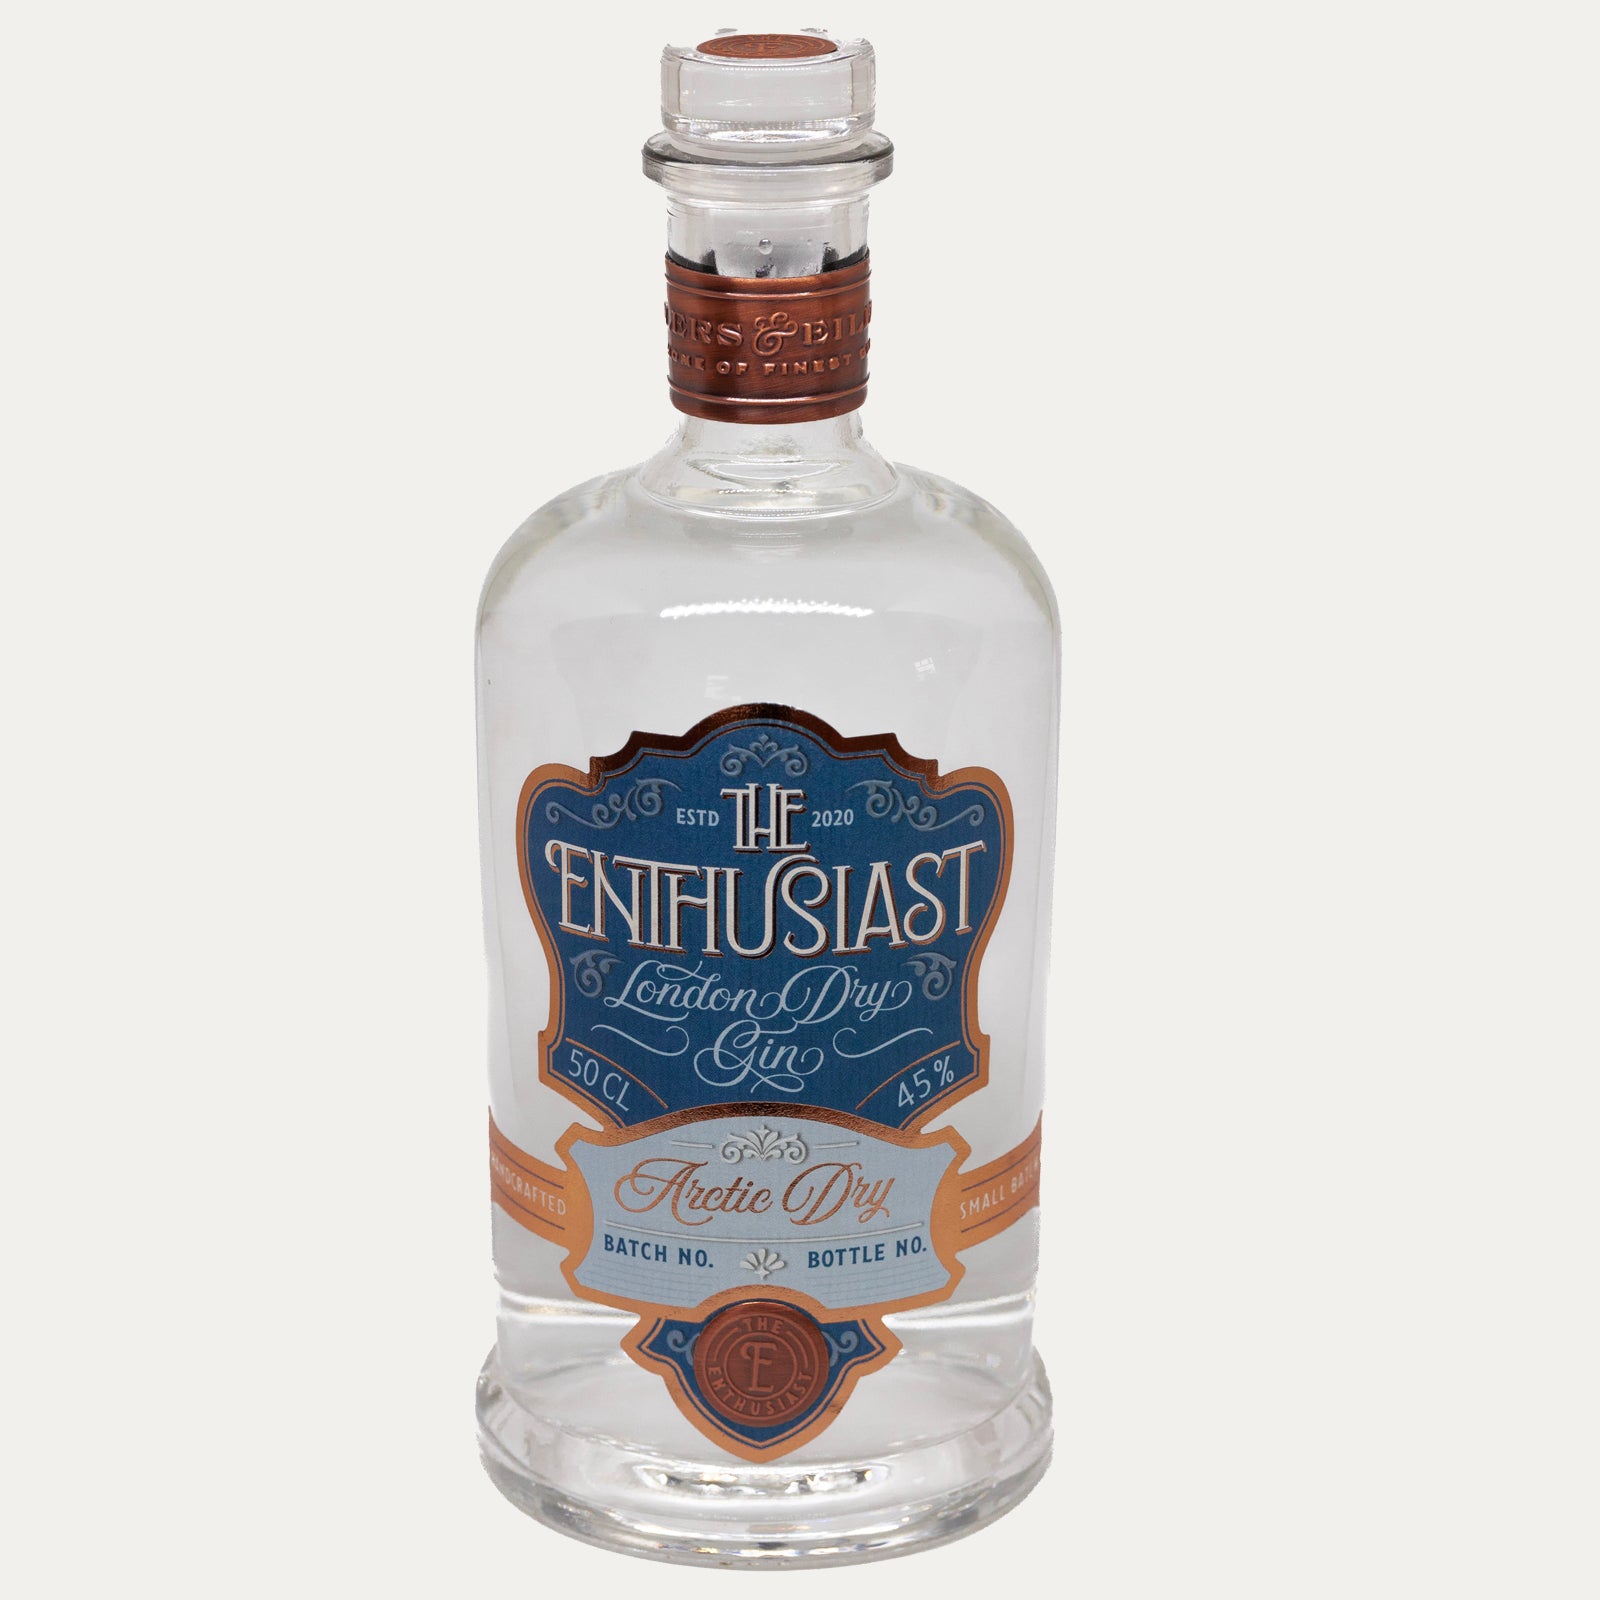 Enthusiast Gin Arctic Dry 45% Vol.